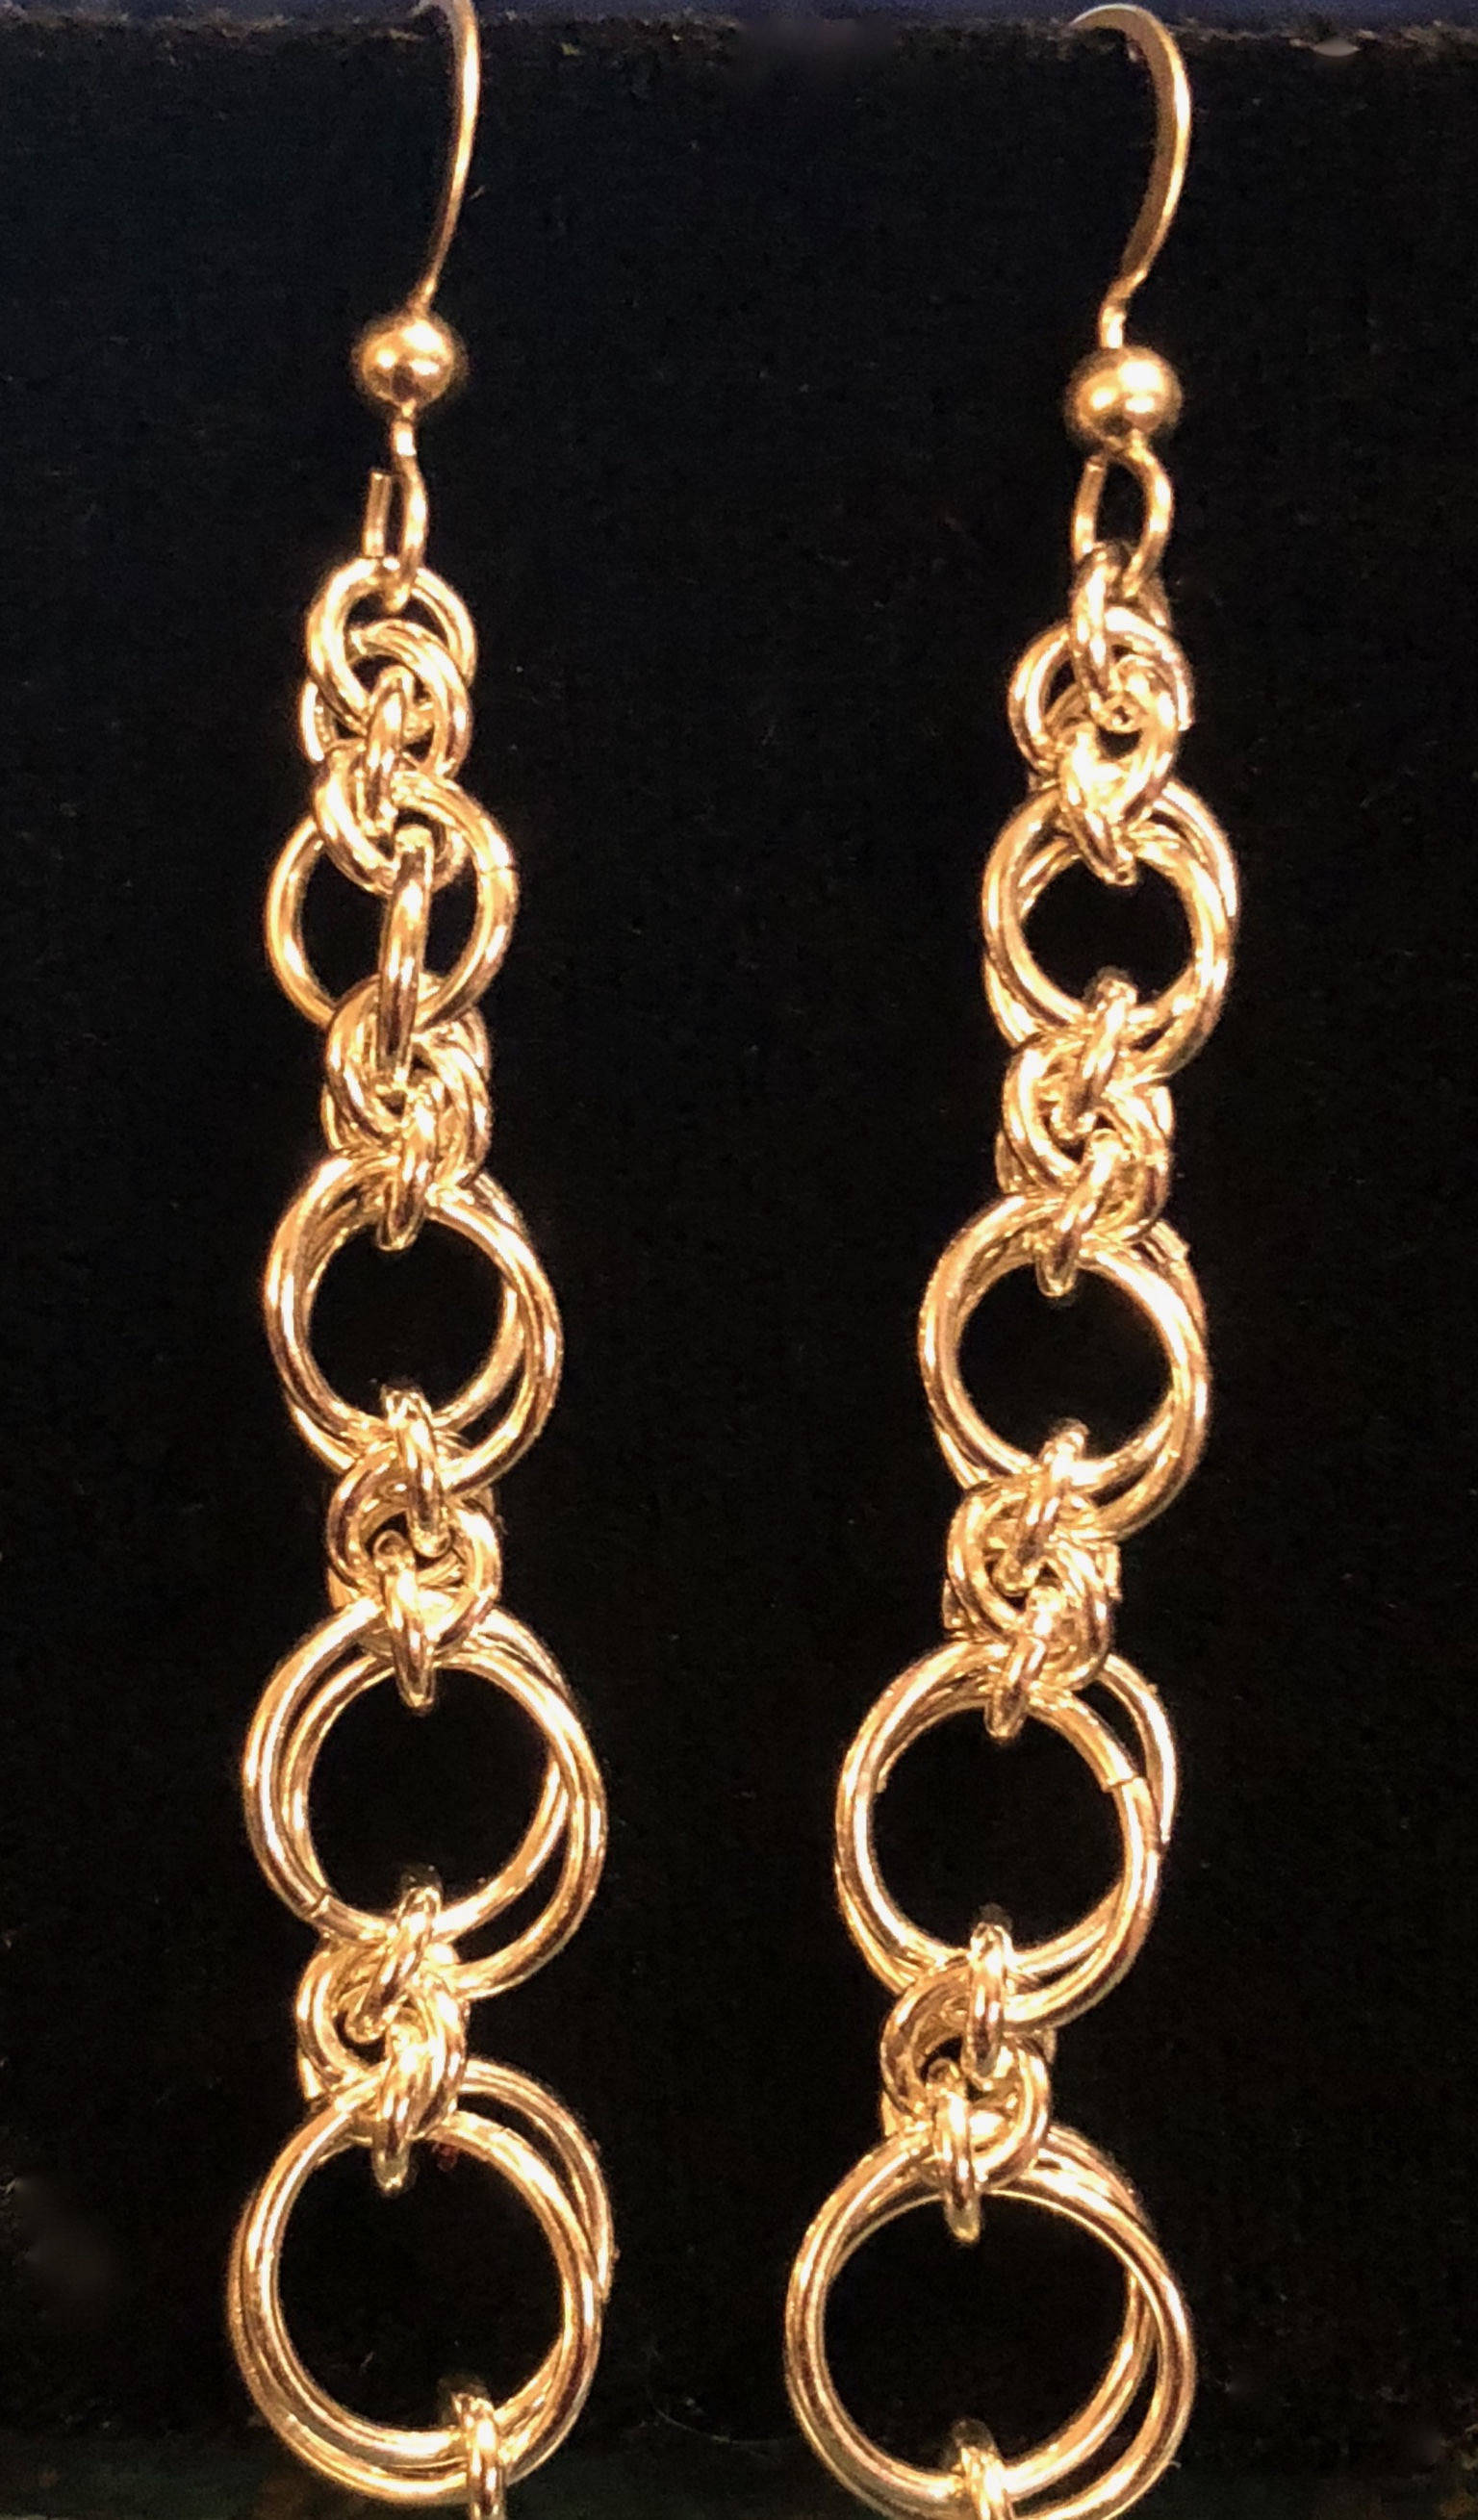 Gallery — Maille Order by Margaret